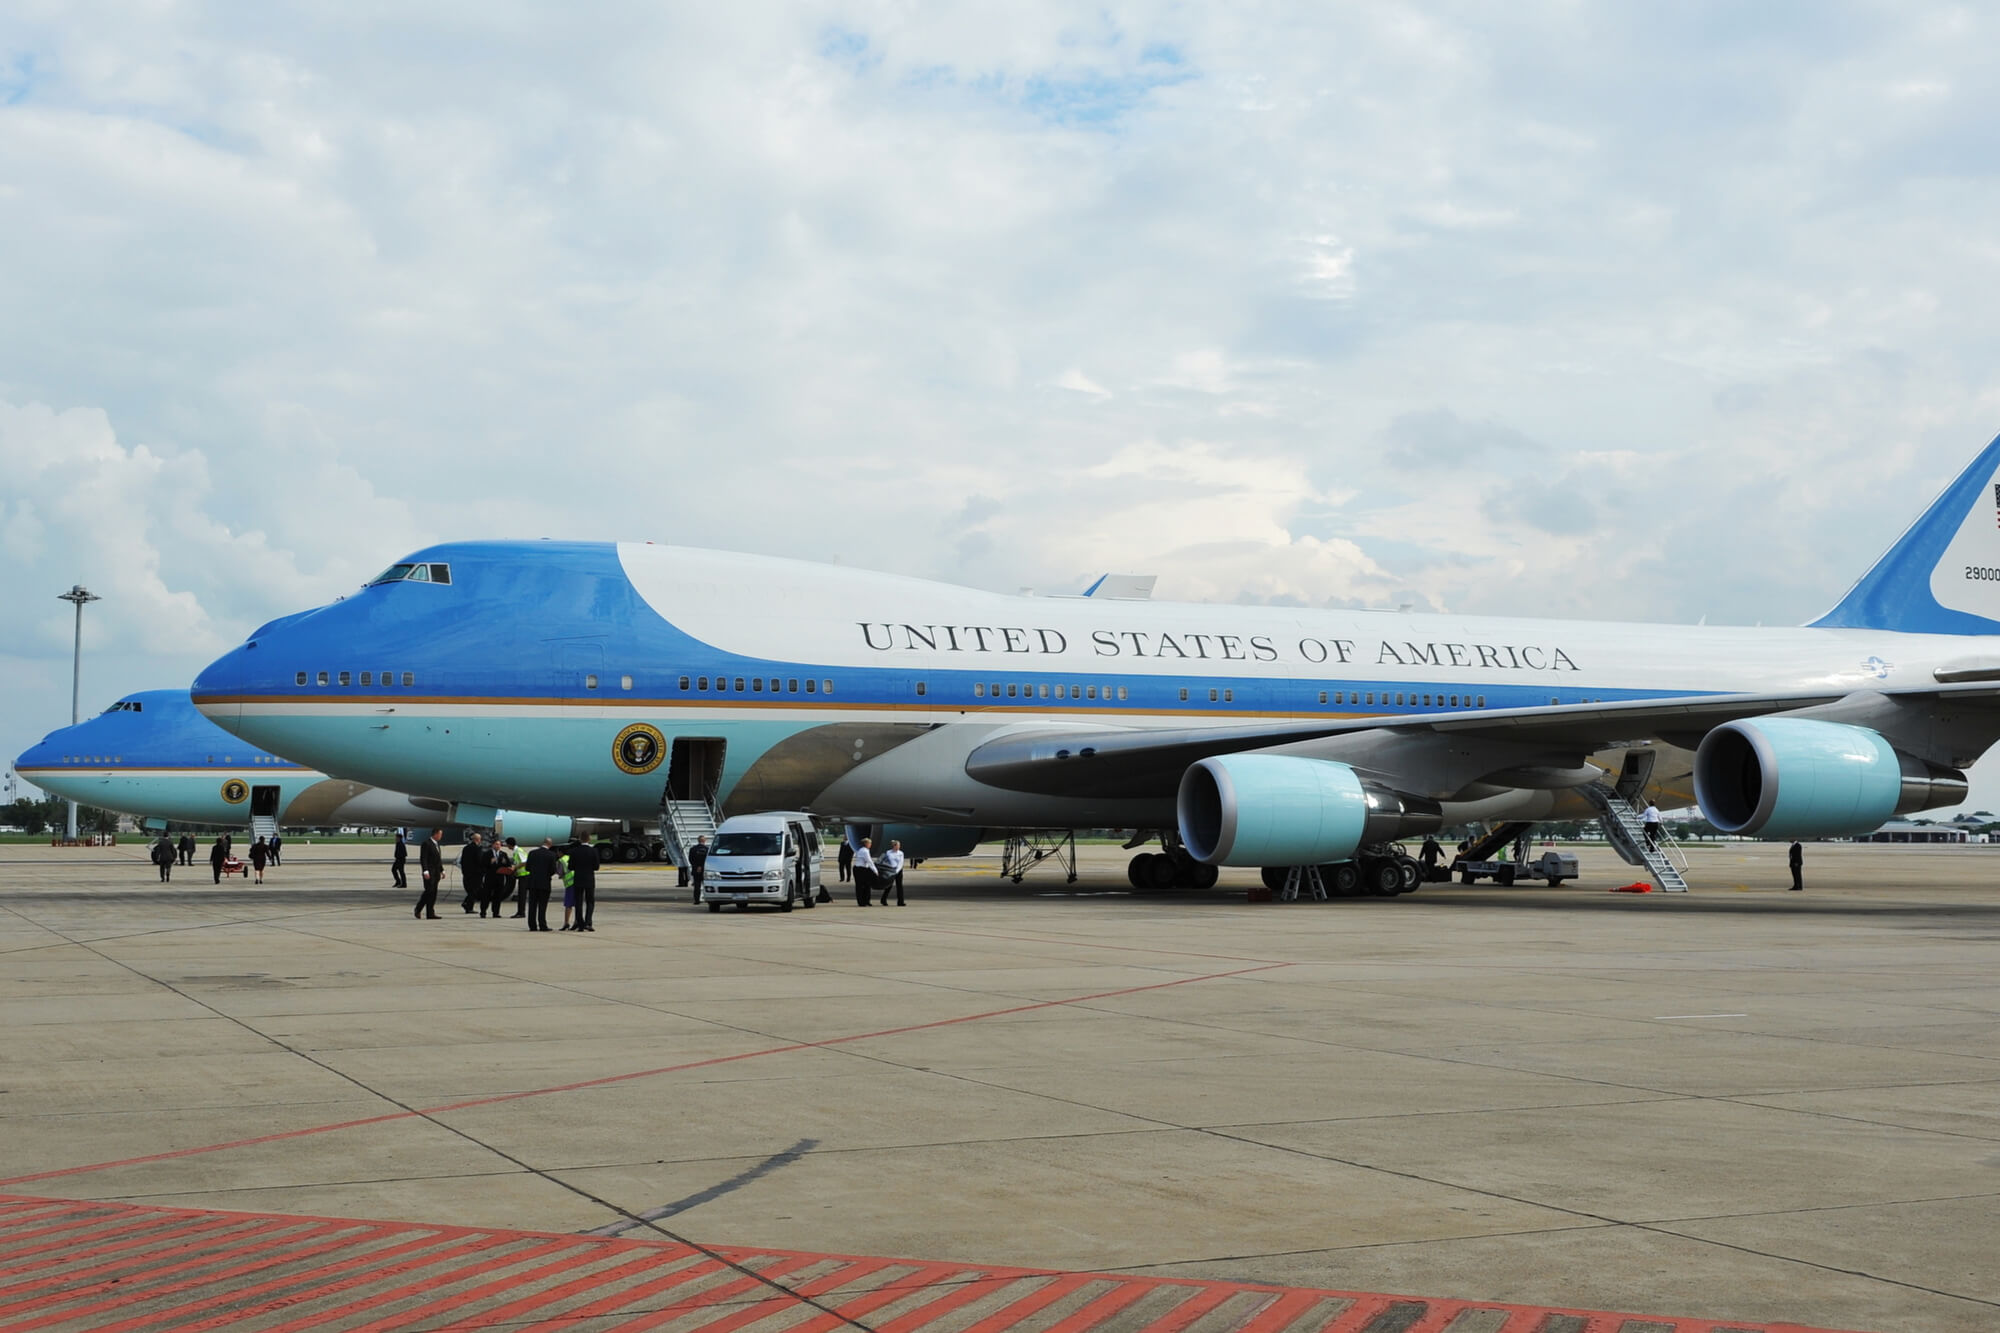 Boeing and contractor lock horns over Air Force One delays - AeroTime